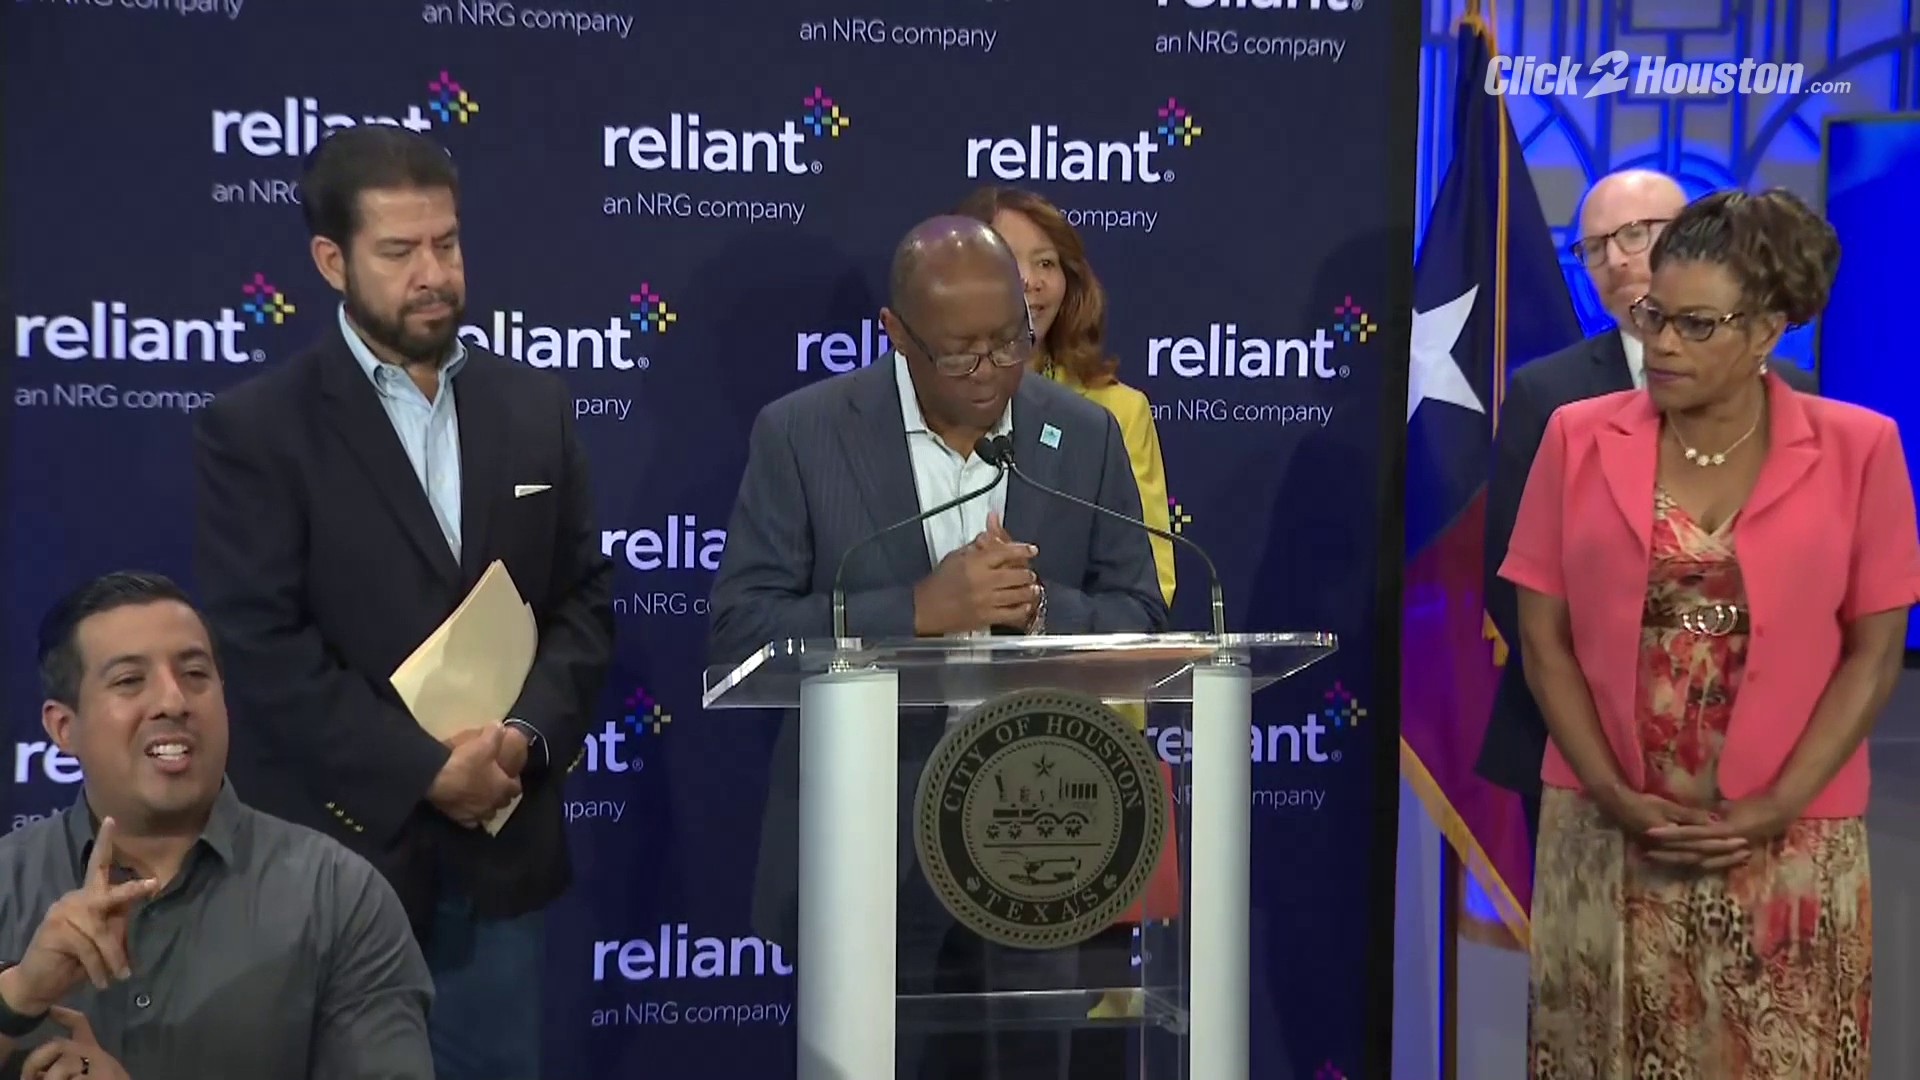 Reliant donates $75K worth of AC units to ‘beat the heat’